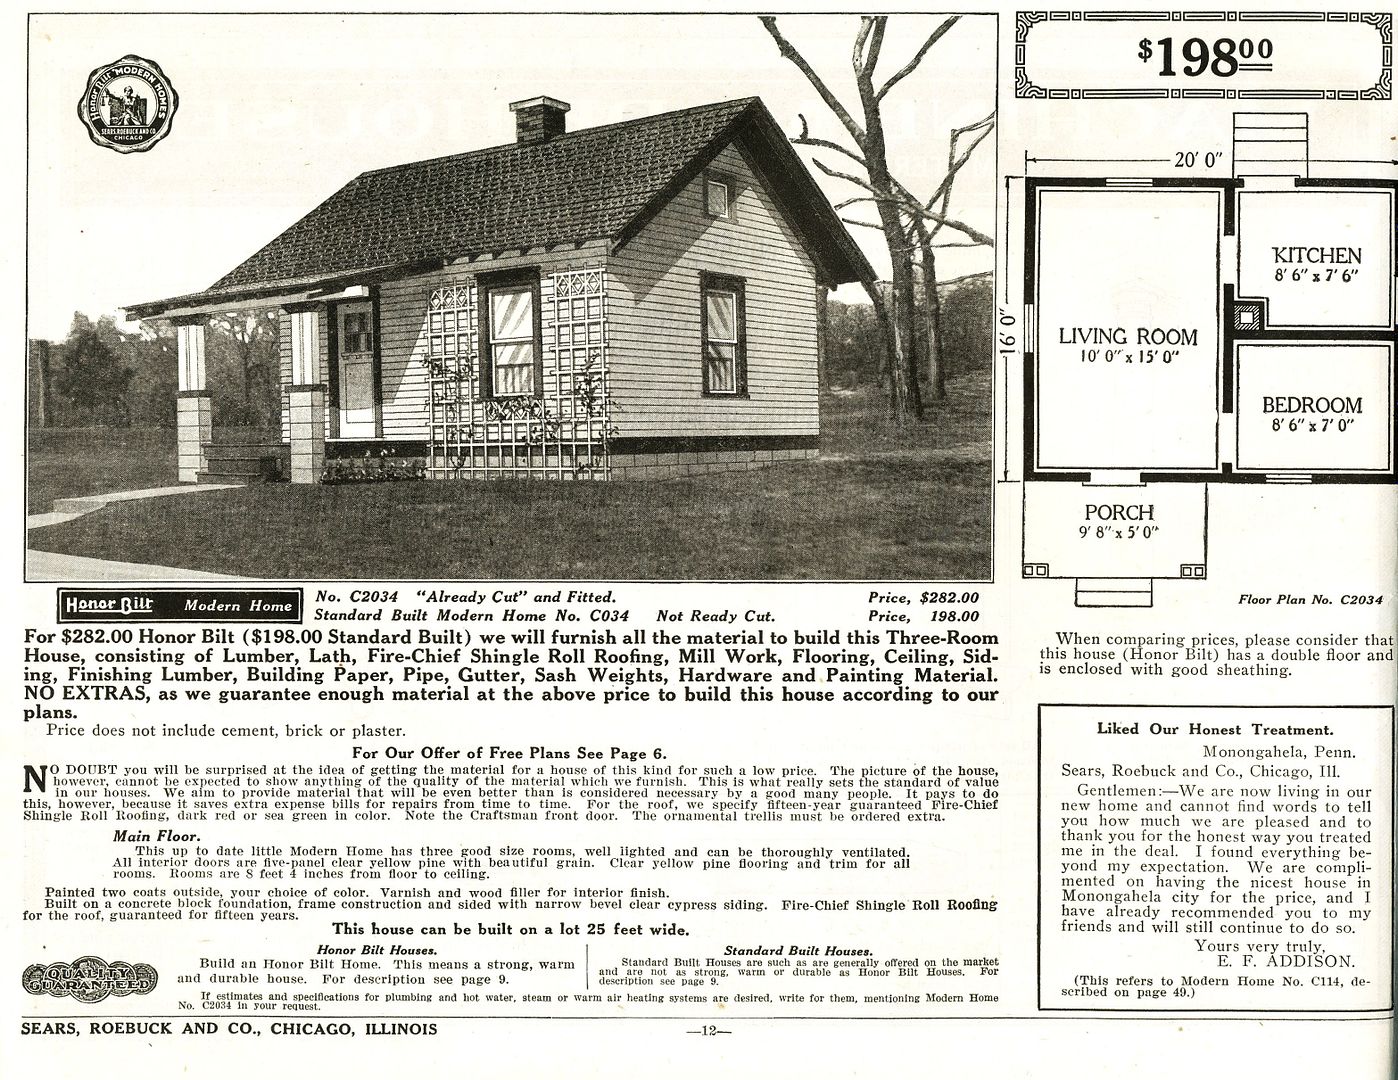 When many folks think of Sears Homes, they think of very modest designs, just like this. 